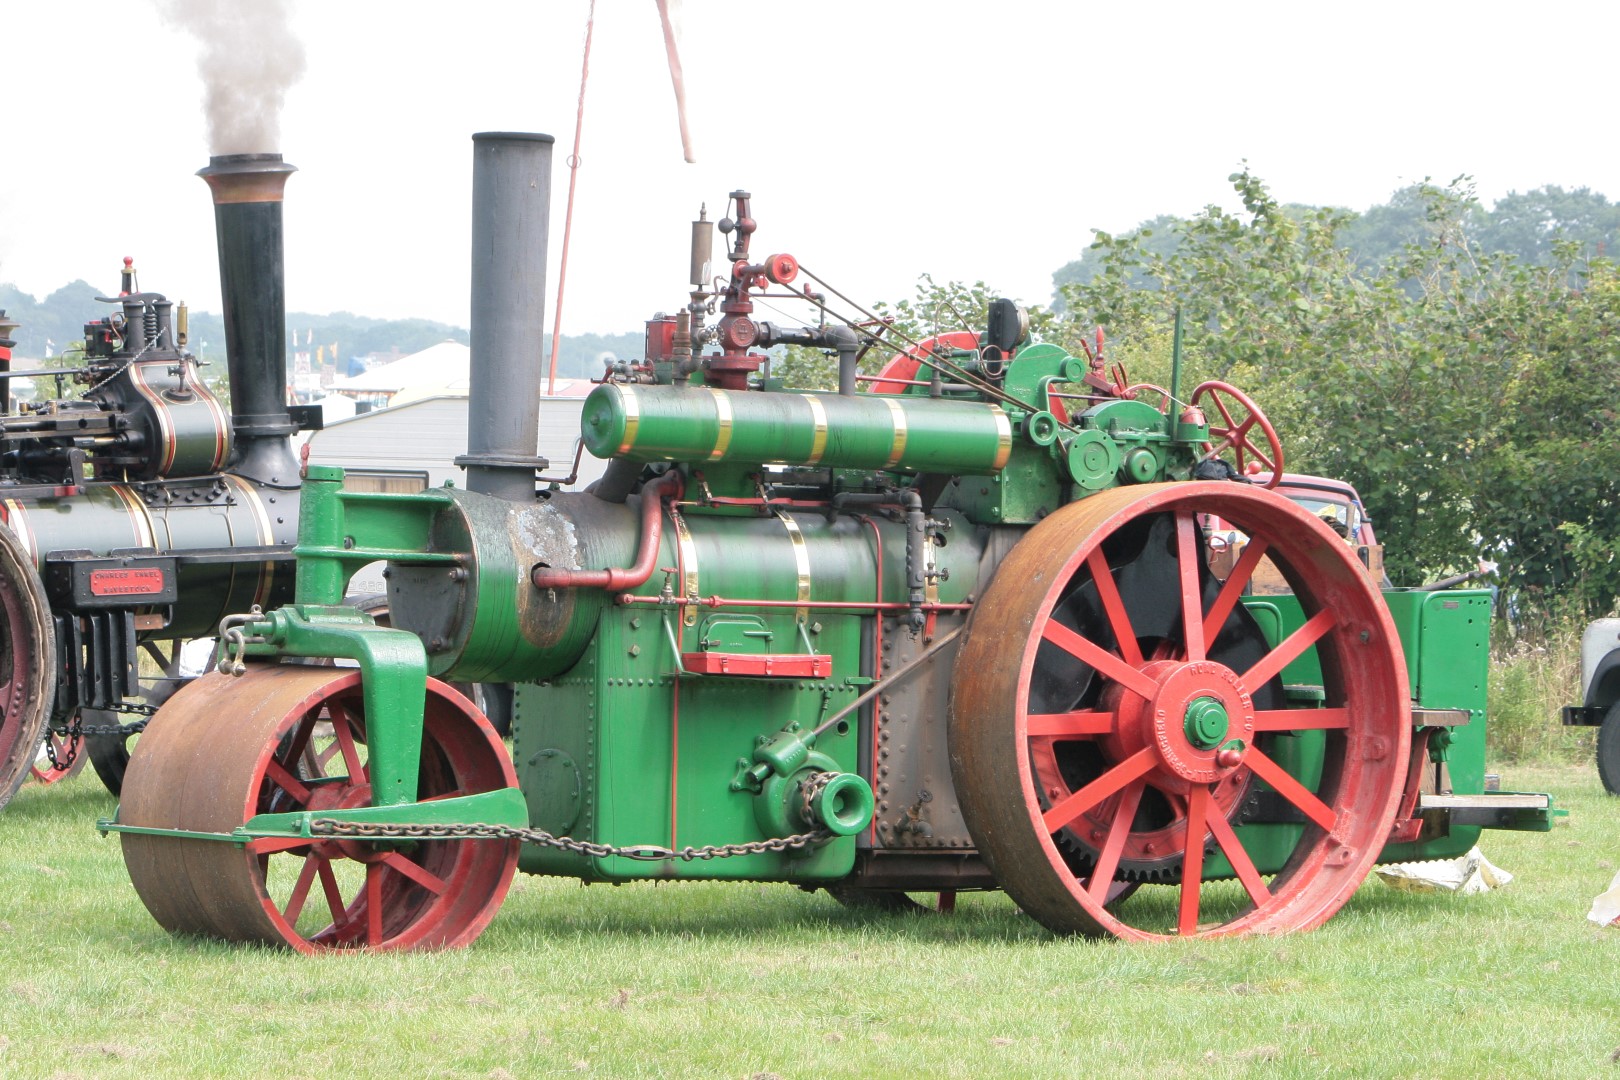 Weald Of Kent Steam and Country Show